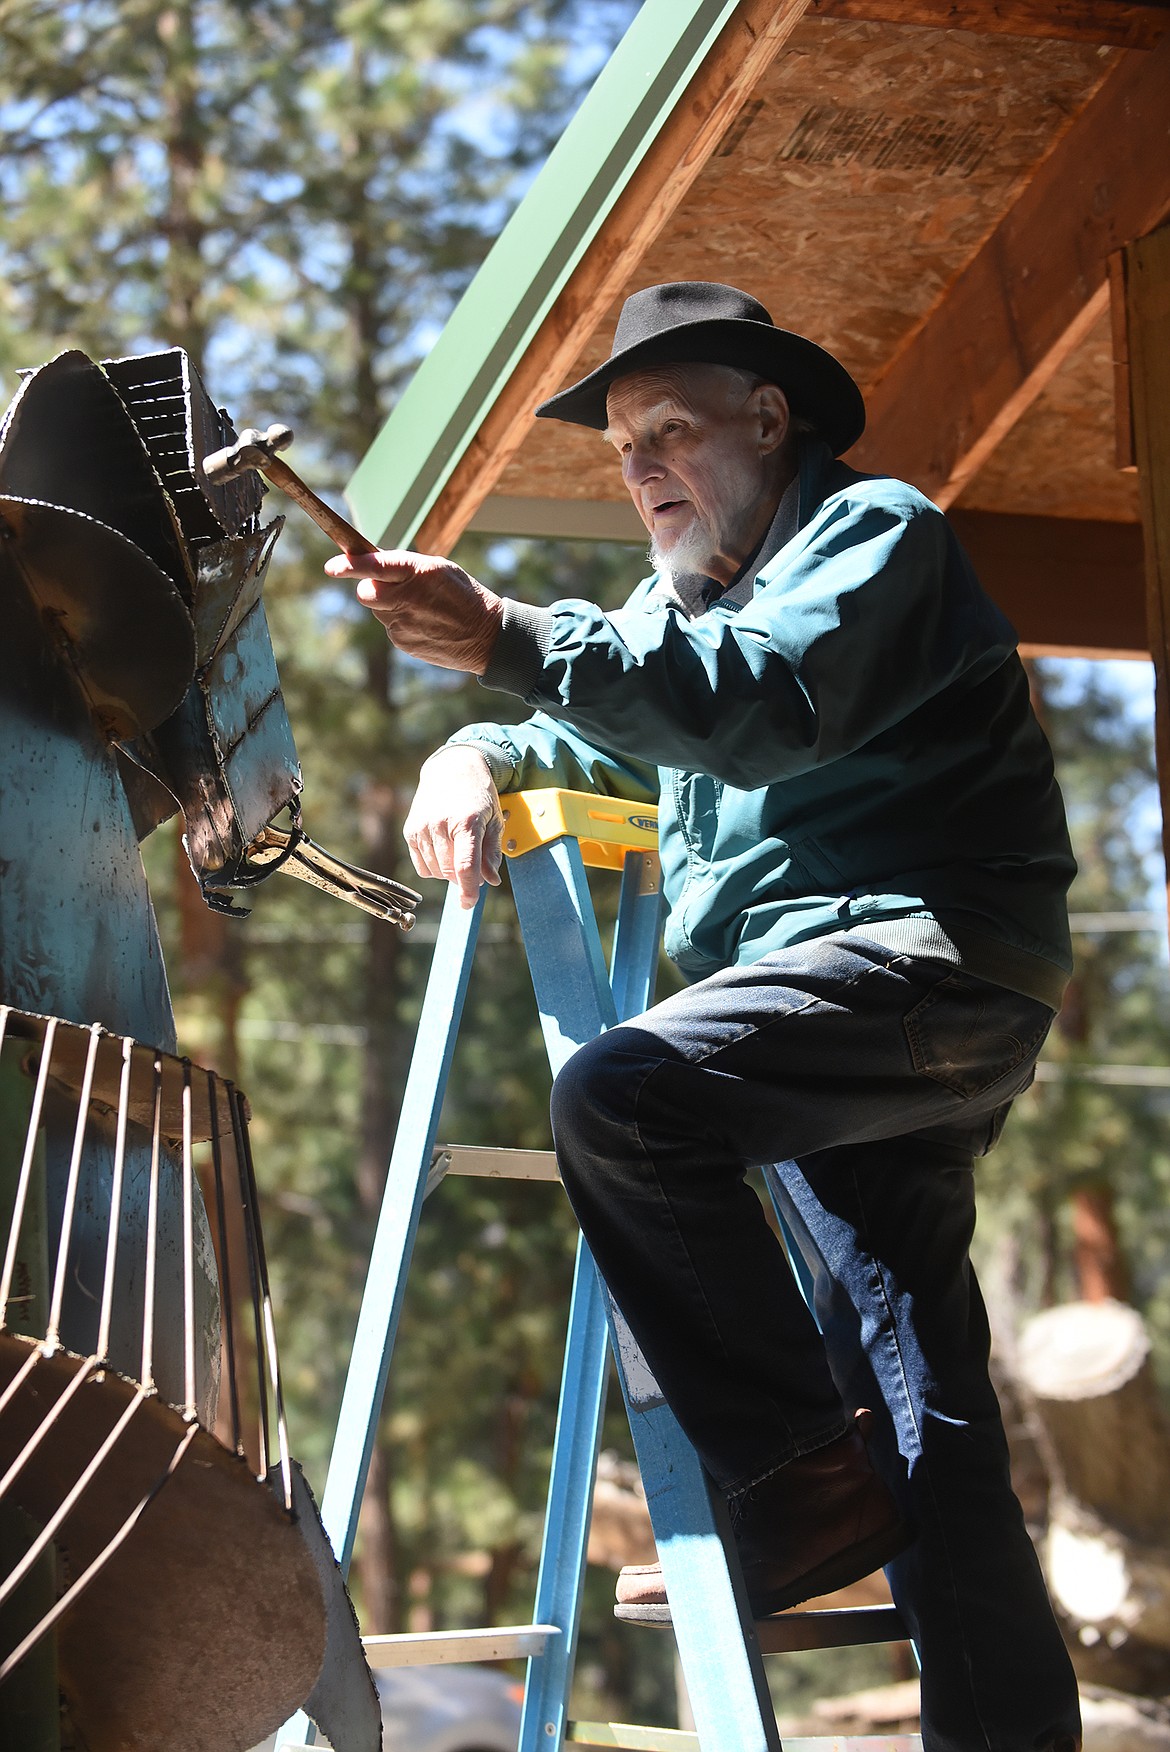 Plains artist Kenton Pies tinkers with a metal horse he is building. Pies has built two horses that are displayed in downtown Plains and he has plans for more. (Scott Shindledecker photos/Daily Inter Lake)